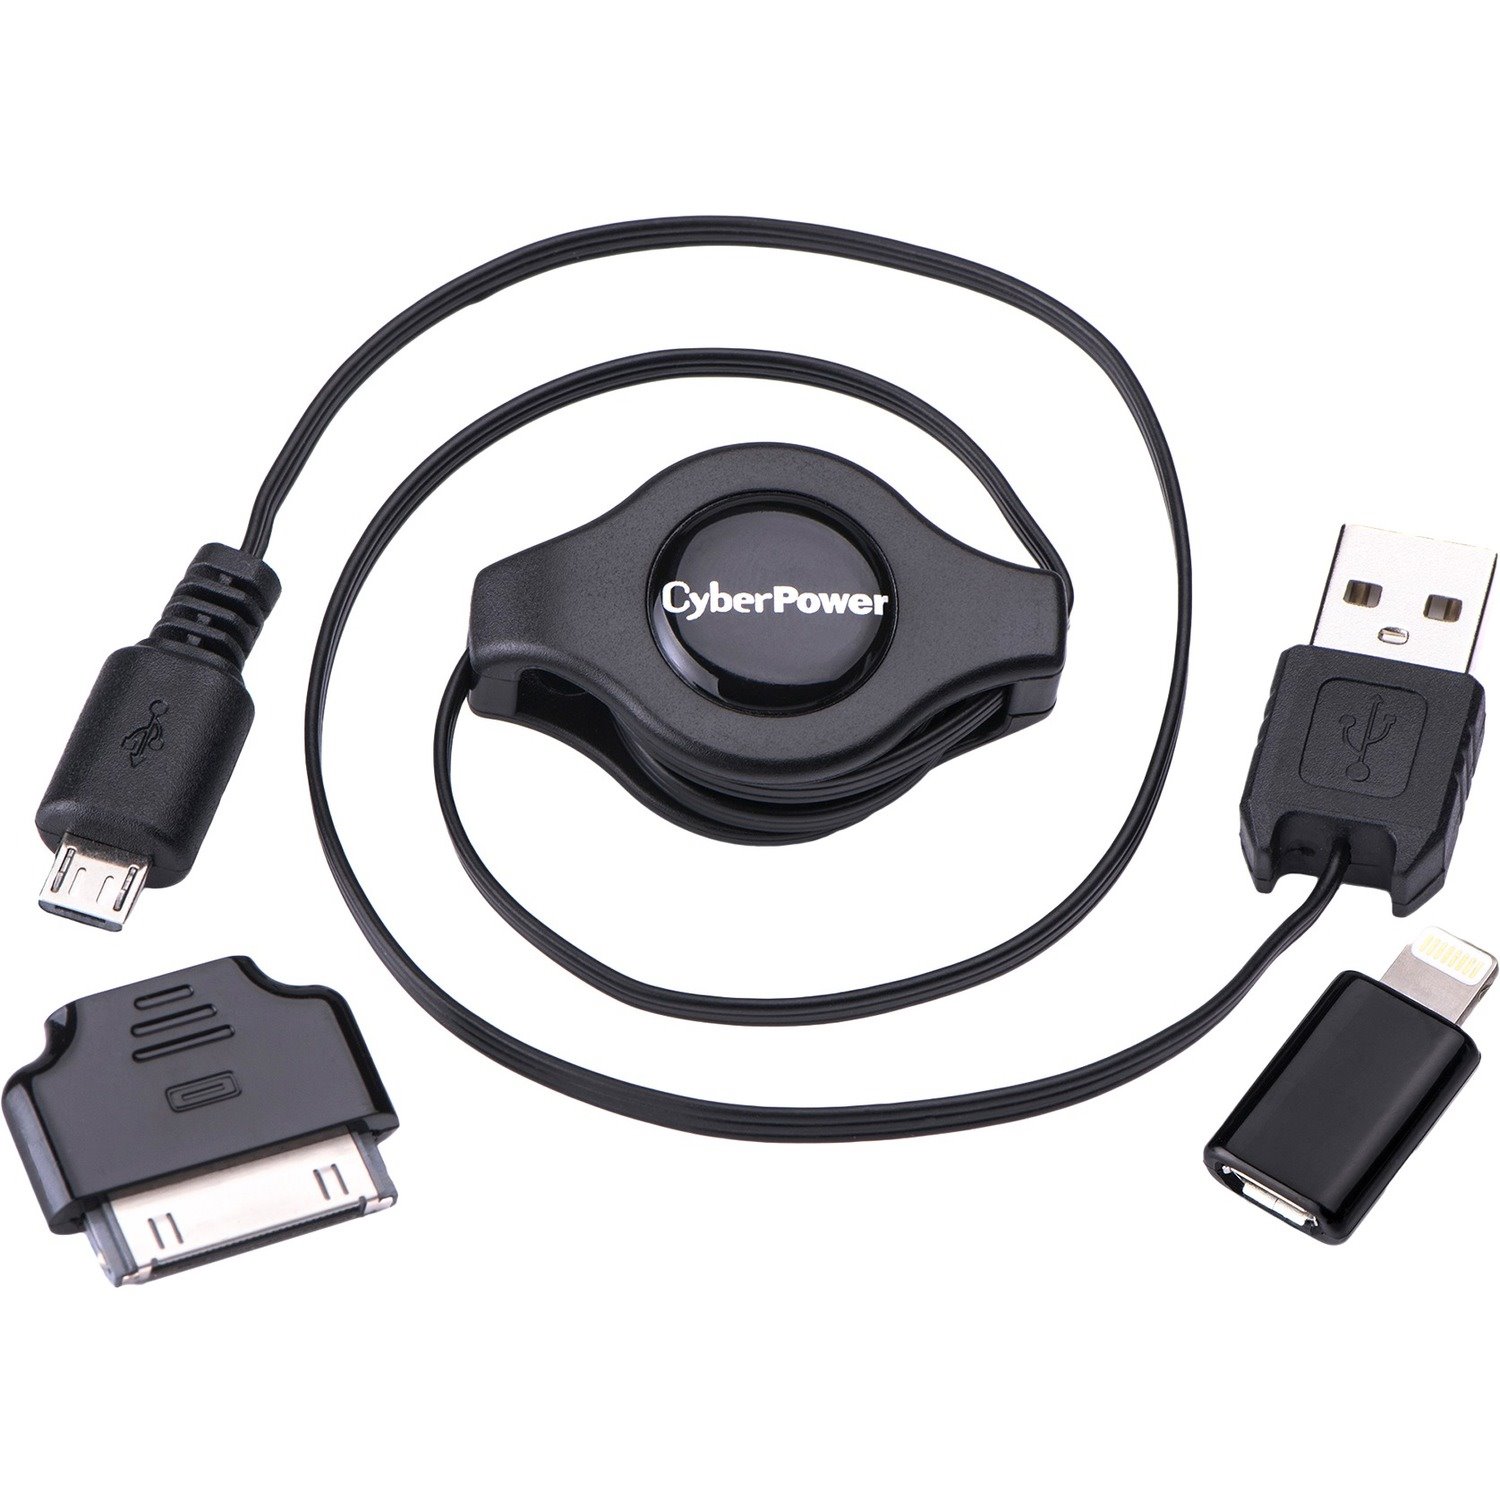 CyberPower iDevice USB Cable Kit for Apple Devices